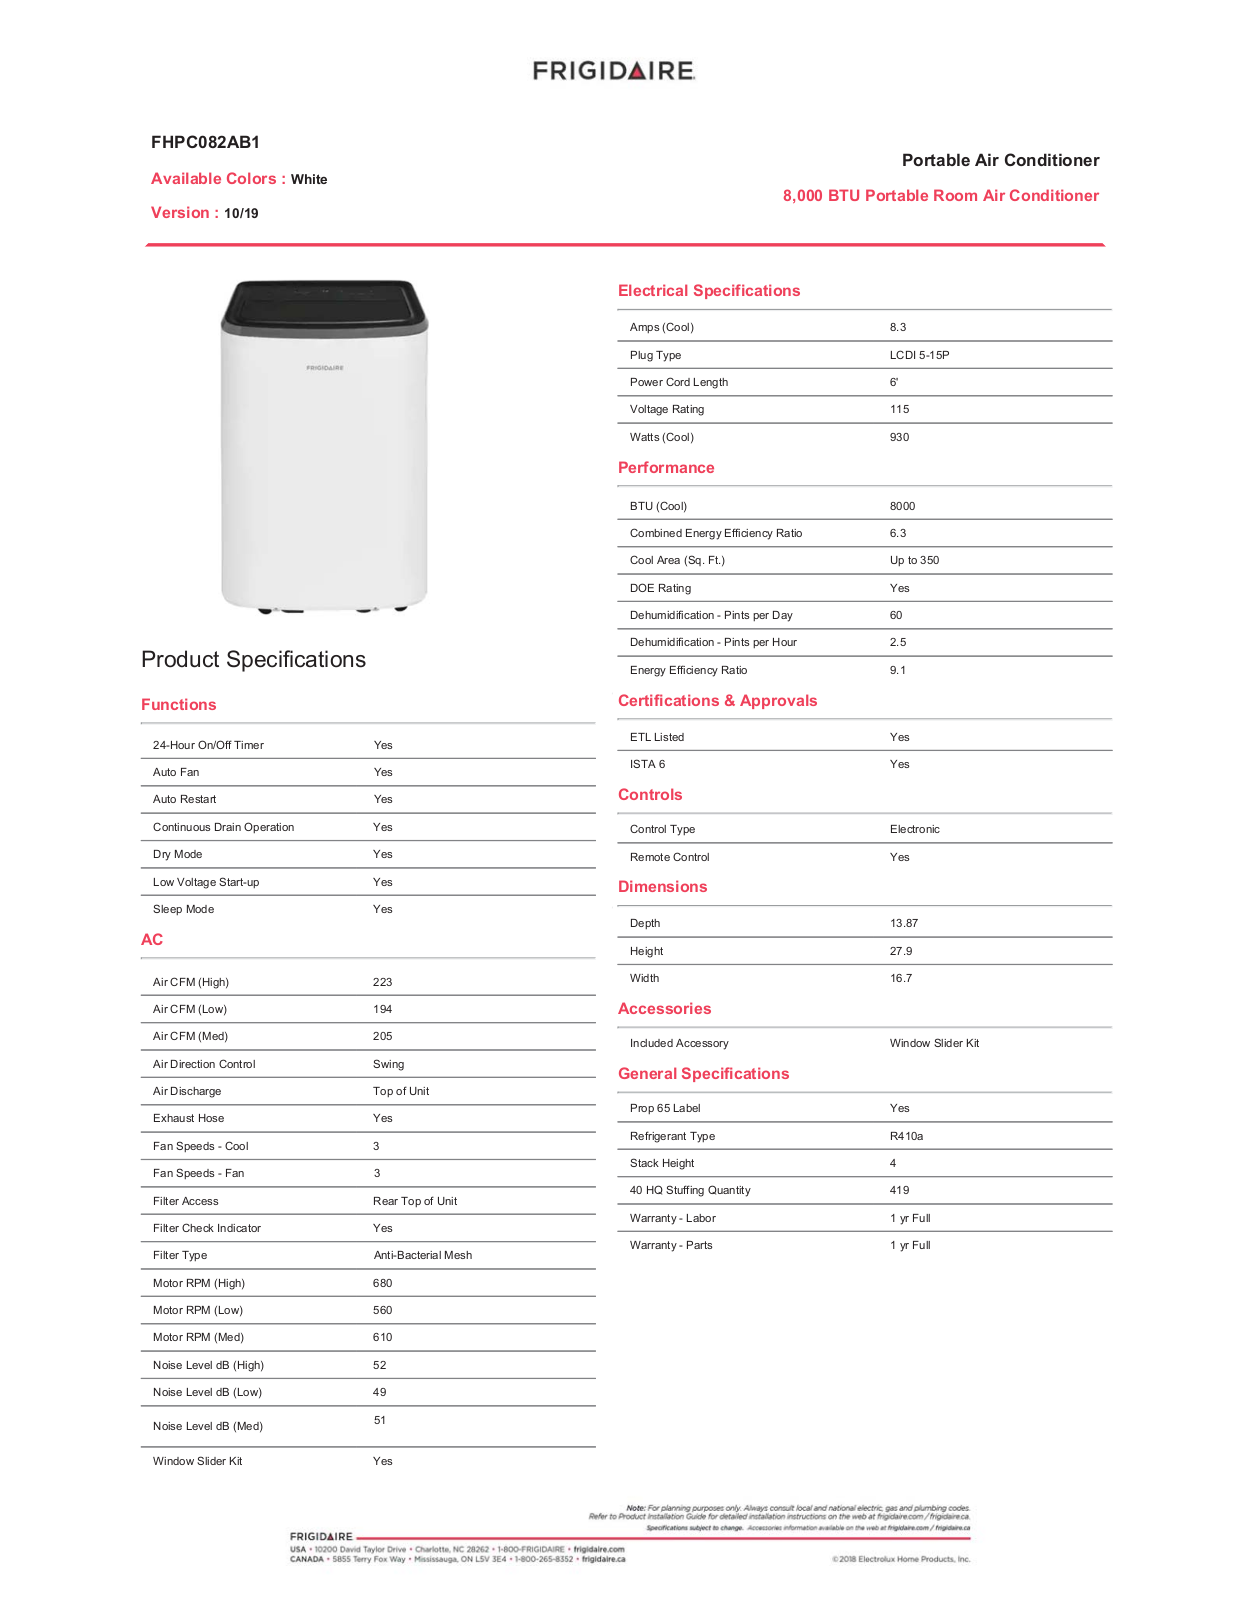 Frigidaire FHPC082AB1 Specifications